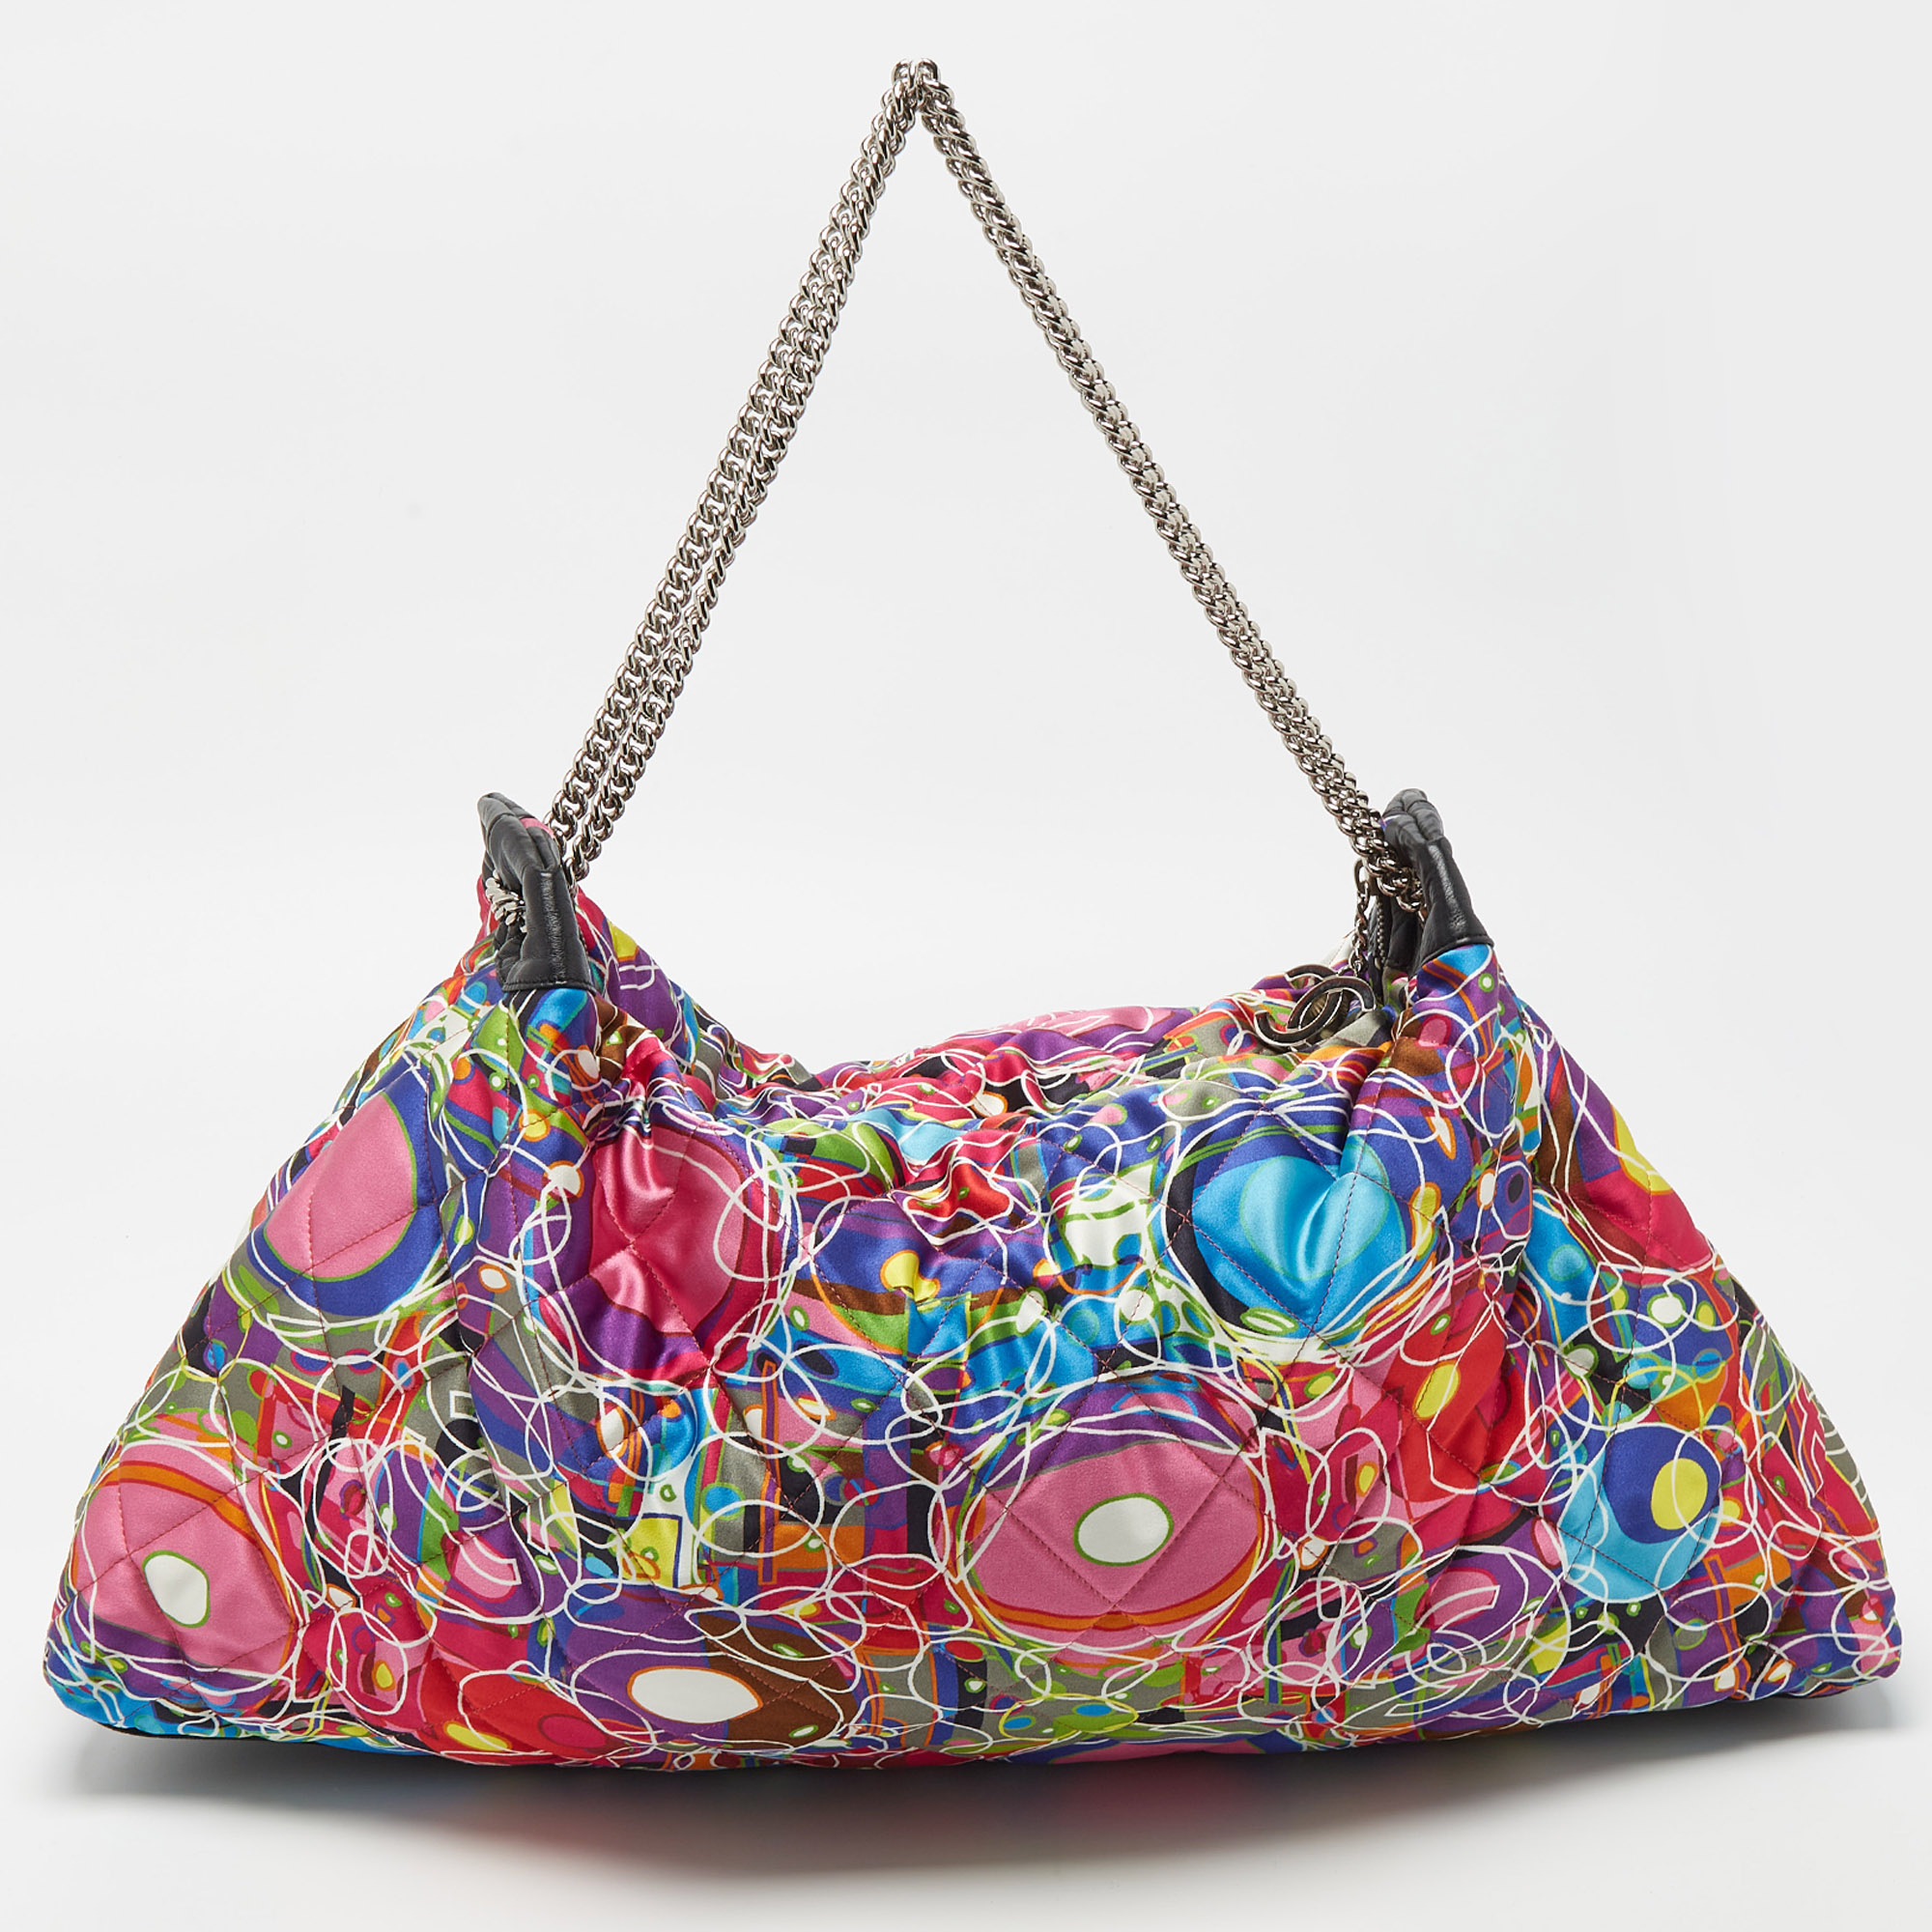 Chanel Multicolor Quilted Printed Satin Kaleidoscope Tote